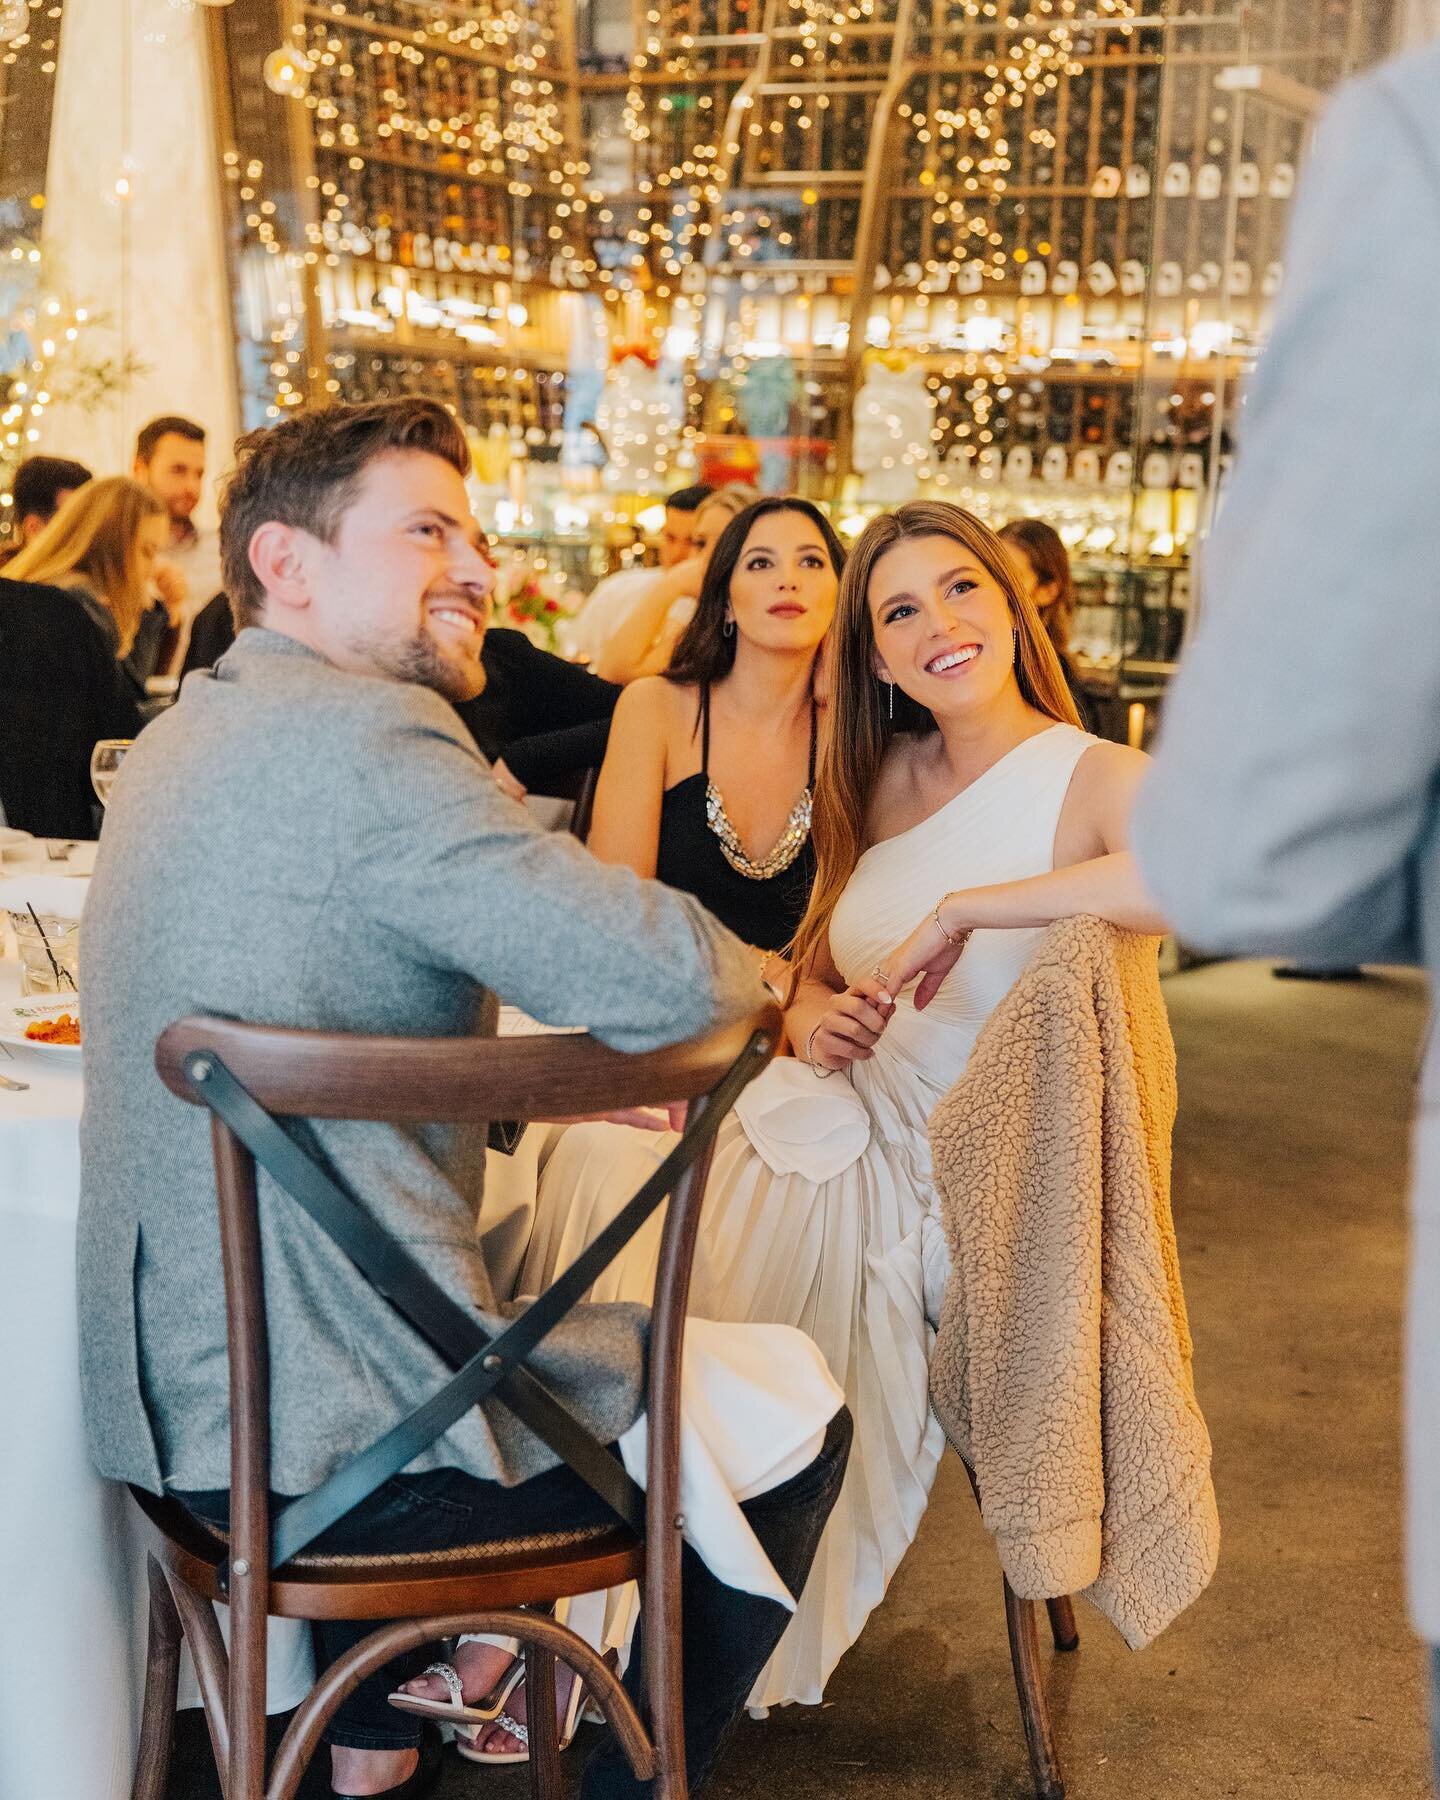 A few tender moments from last nights rehearsal dinner with Jody &amp; Daniel 🥂